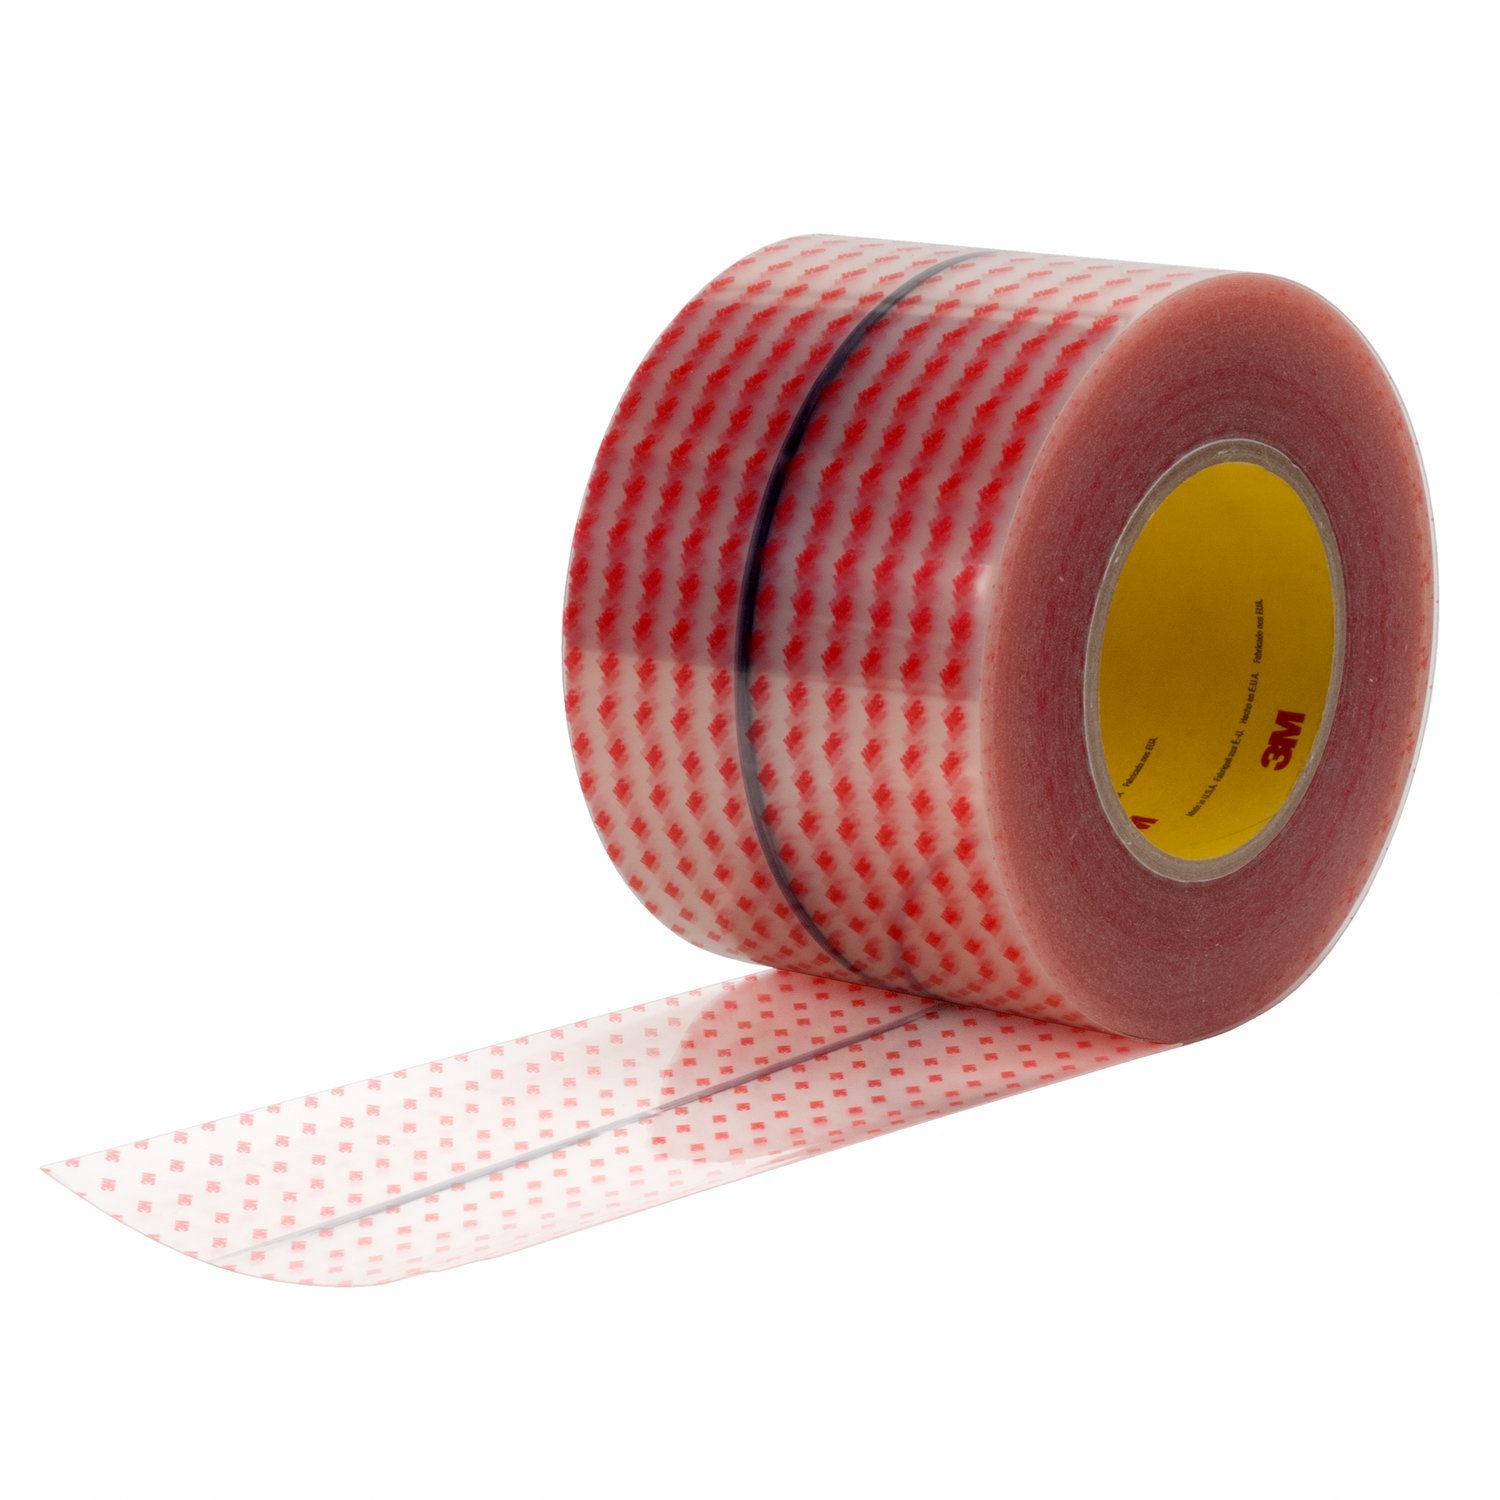 7100015837 - 3M Polyurethane Protective Tape 8658DL, Transparent, Flame Retardant, 4
in x 36 yd, 2 Roll/Case